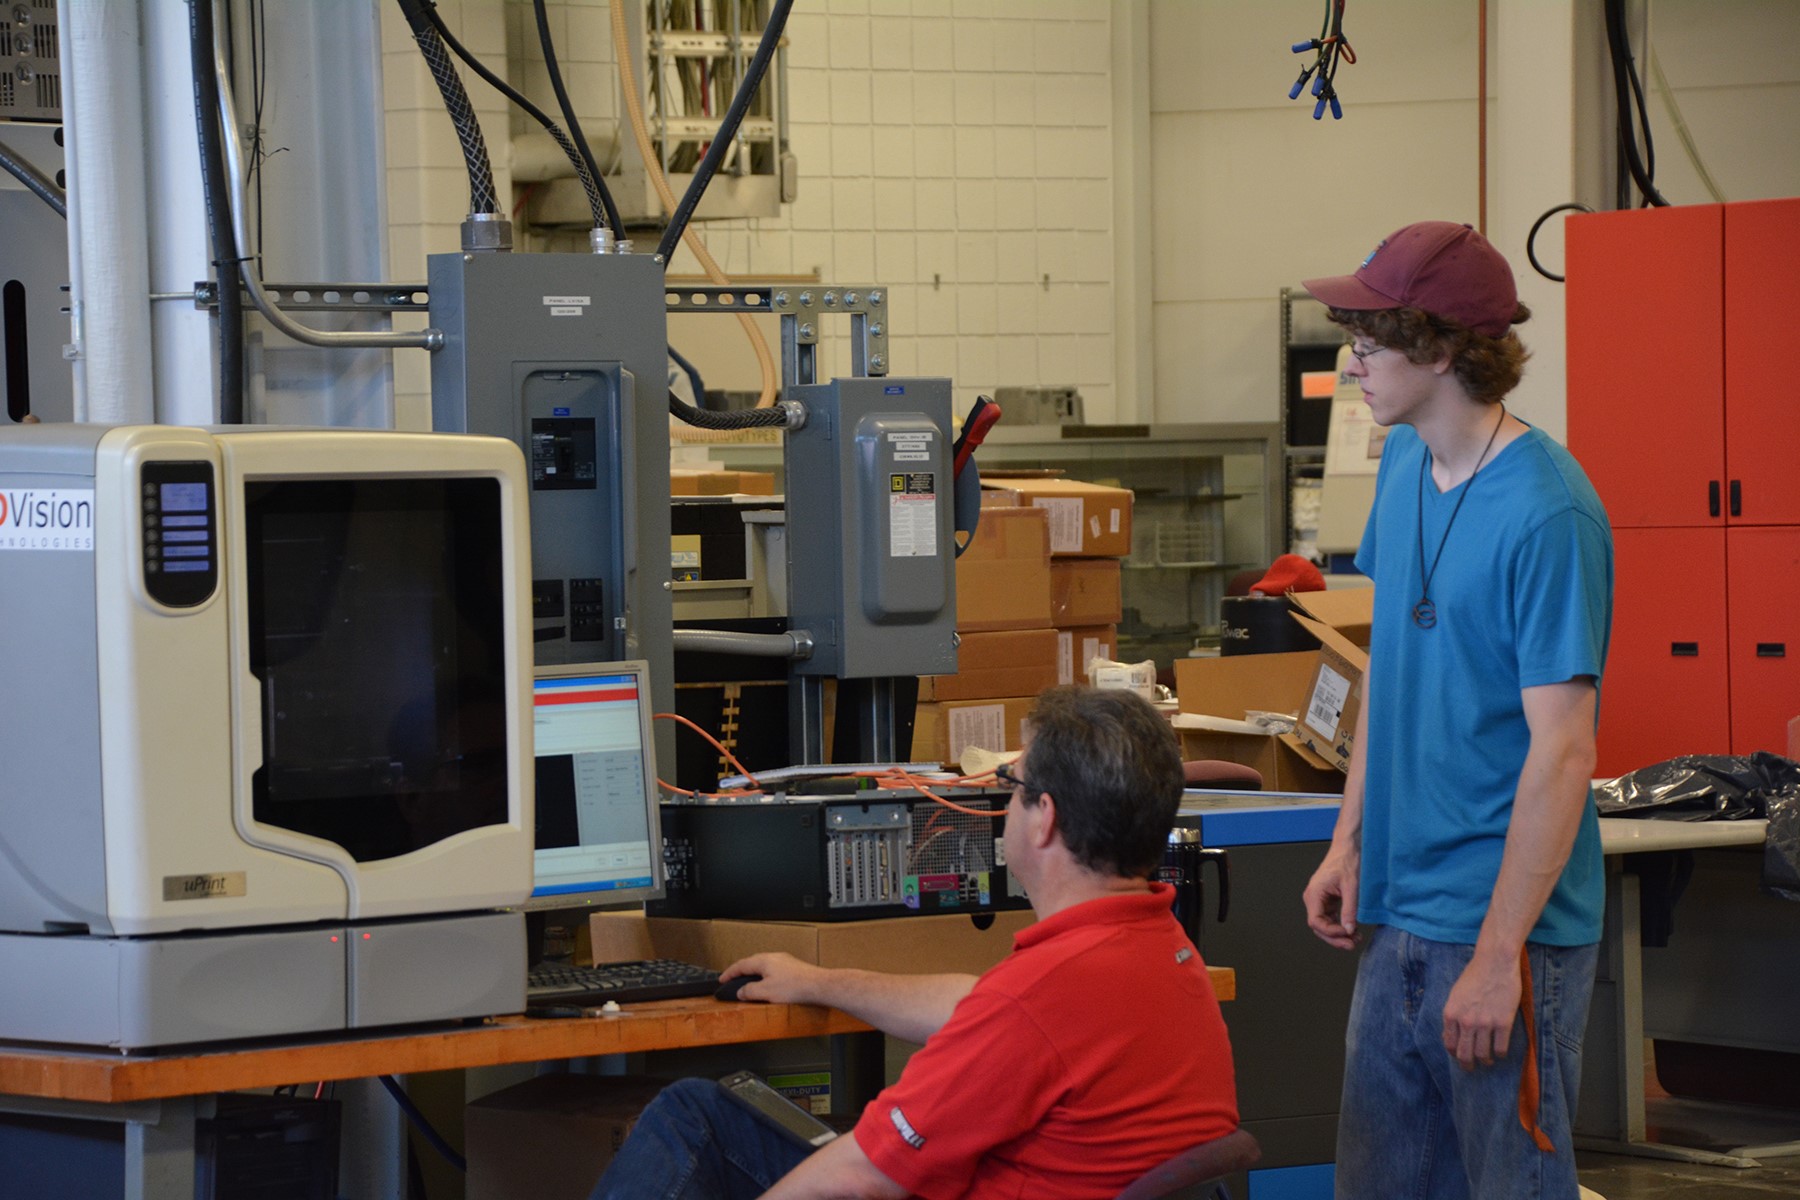 The Rapid Prototyping Center at the University of Louisville J.B. Speed School of Engineering, which worked with 3DSIM, now part of ANSYS, to test software for additive manufacturing.